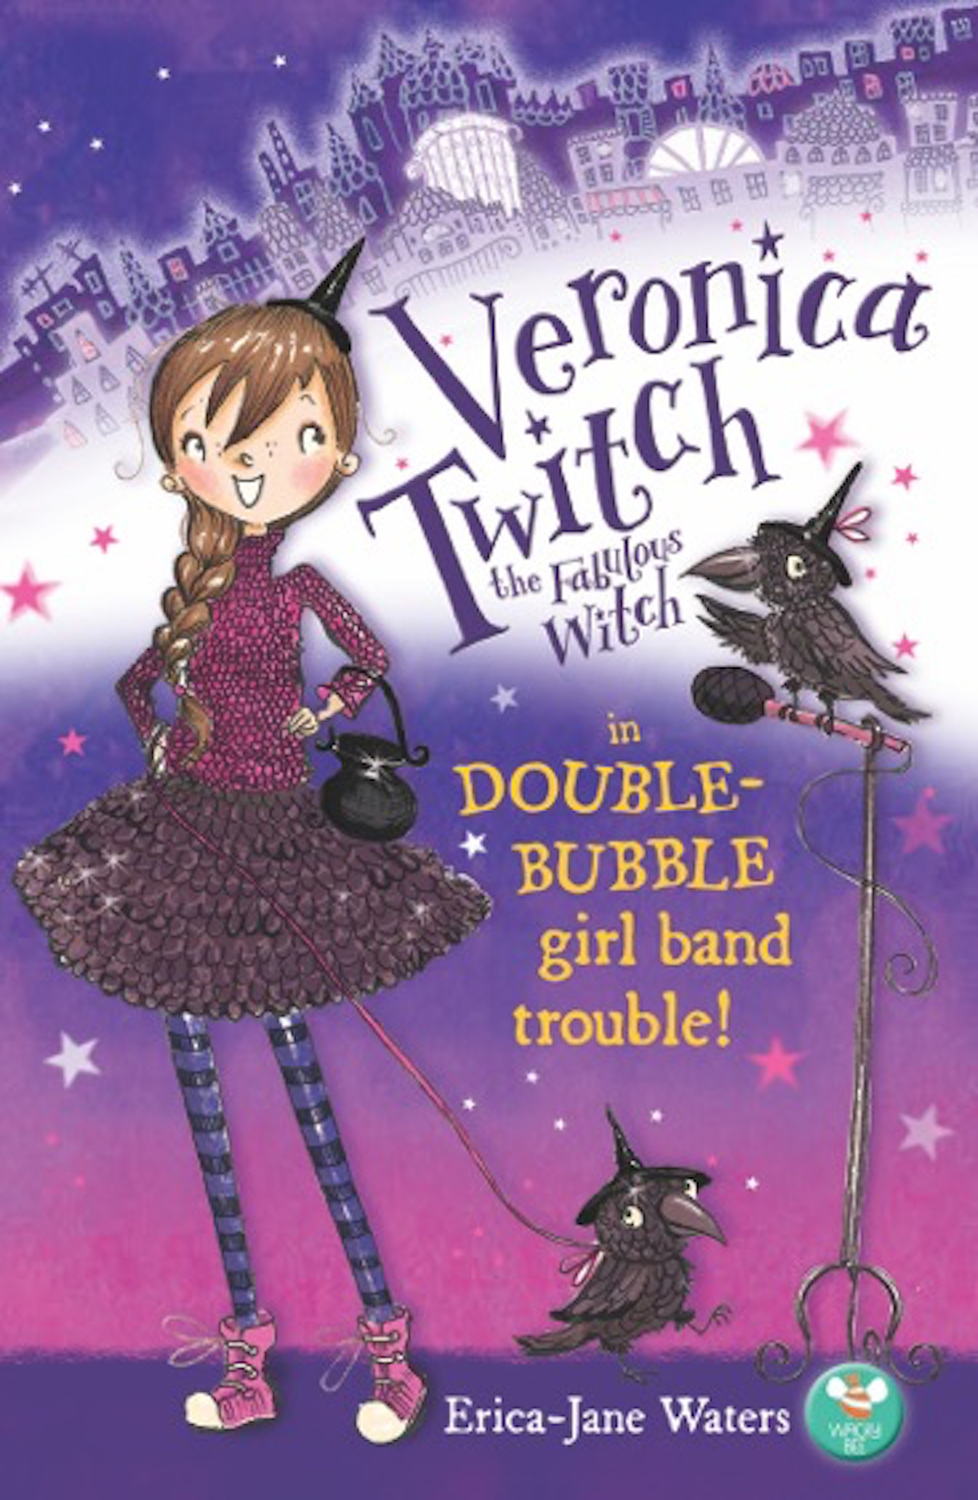 Veronica Twitch, the Fabulous Witch: Double-Bubble Girl-Band Trouble!